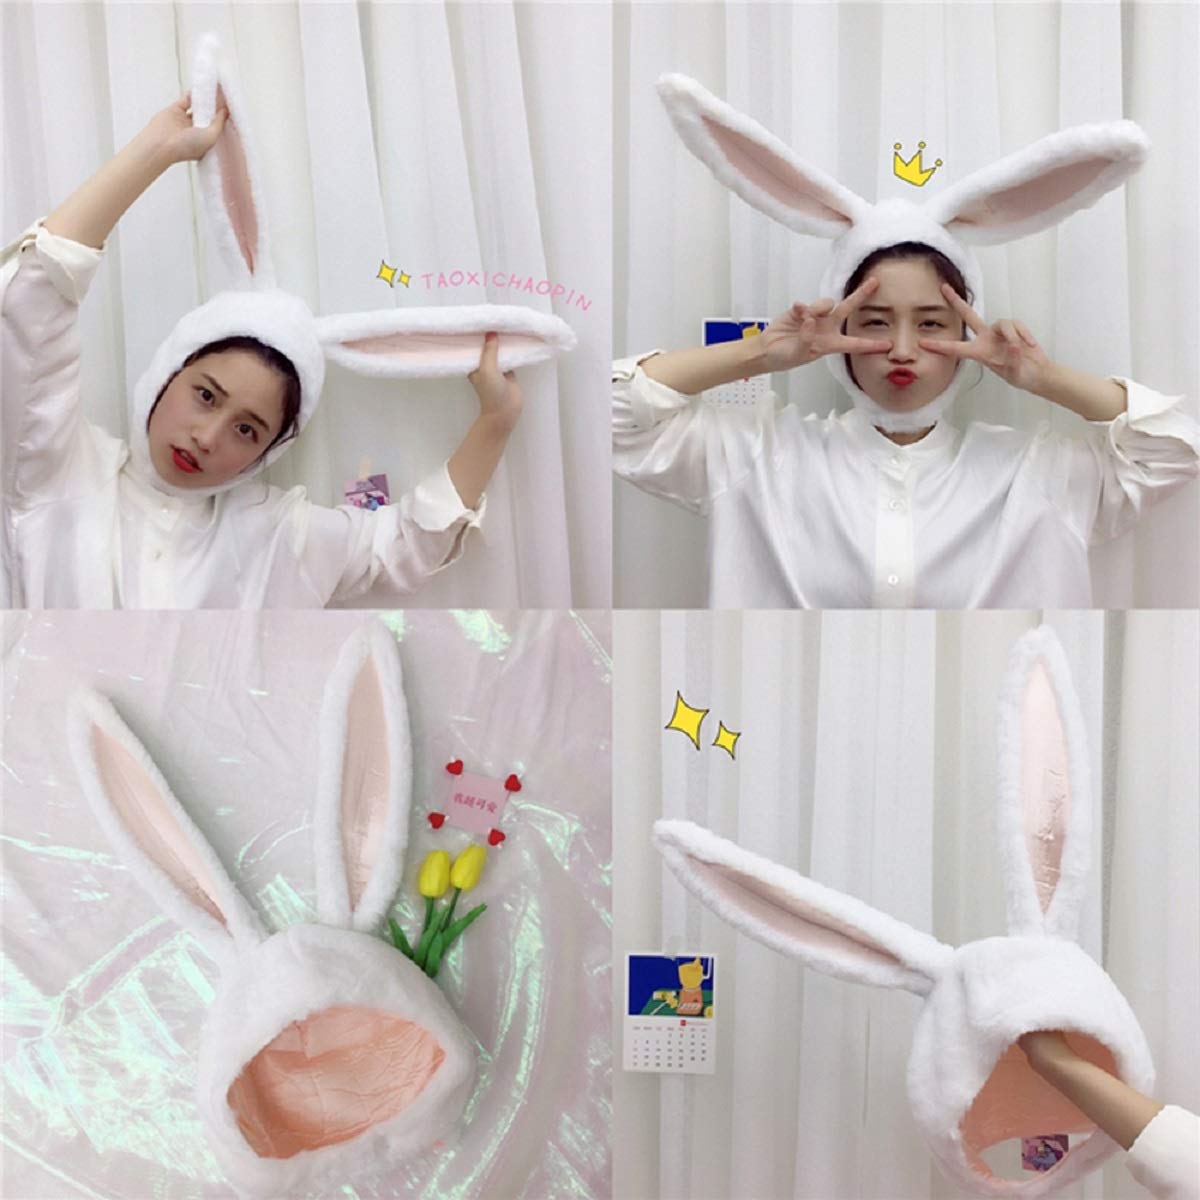 IUTOYYE Easter Bunny Hat Cute Rabbit Ears Costume Funny Party Favors Hats Cosplay Accessories Easter Decorations (Rabbit)